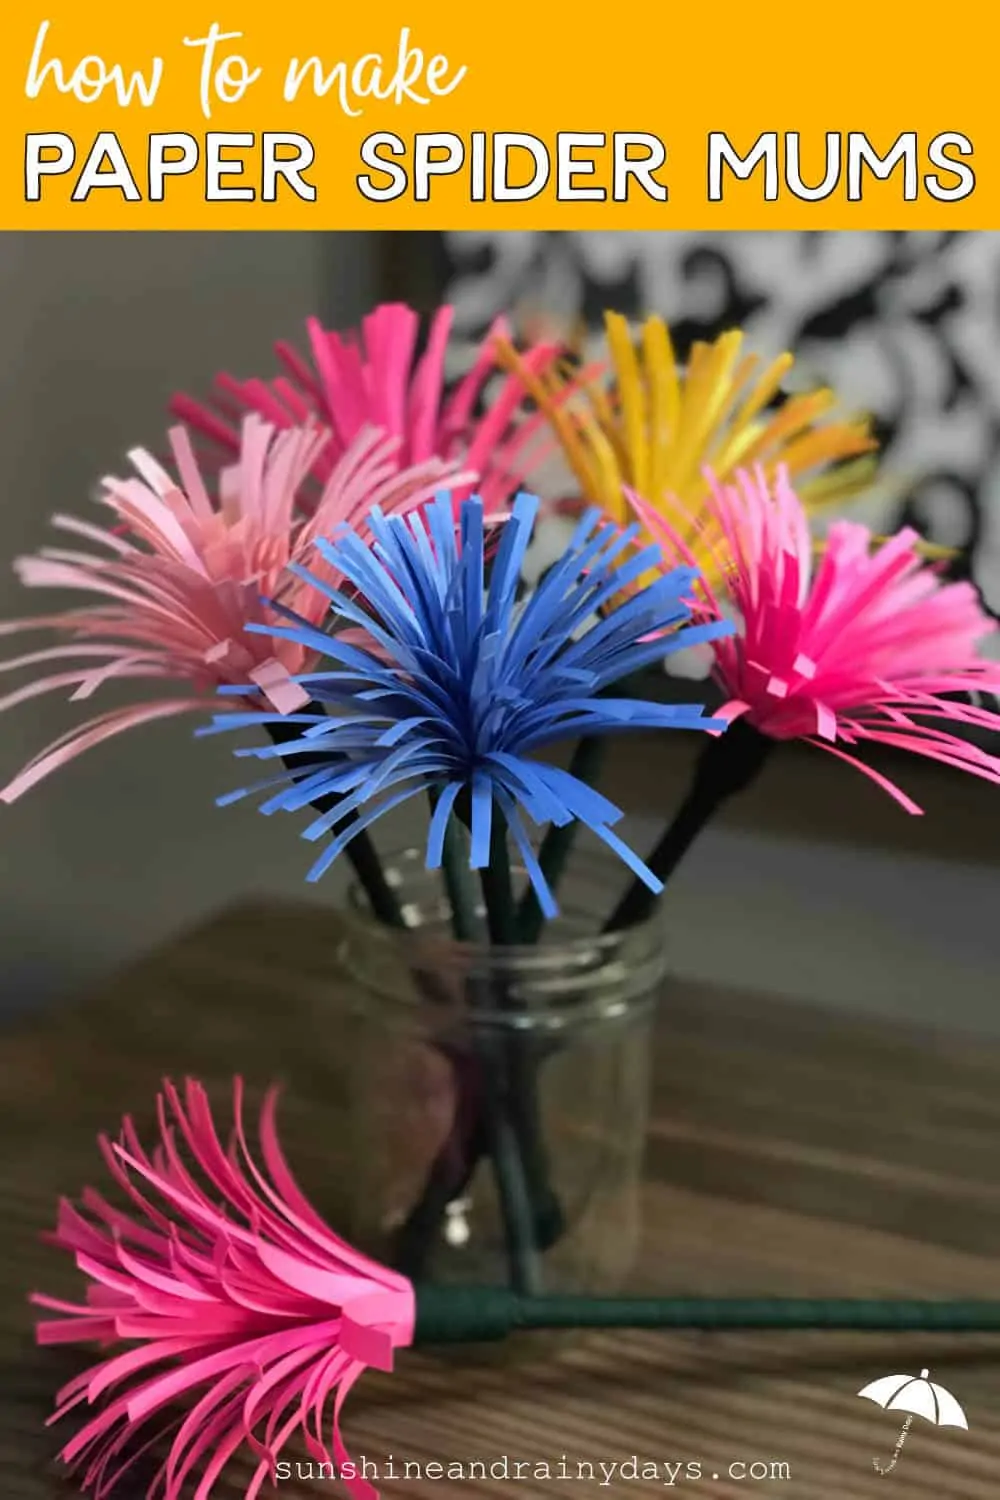 How To Make Paper Spider Mums